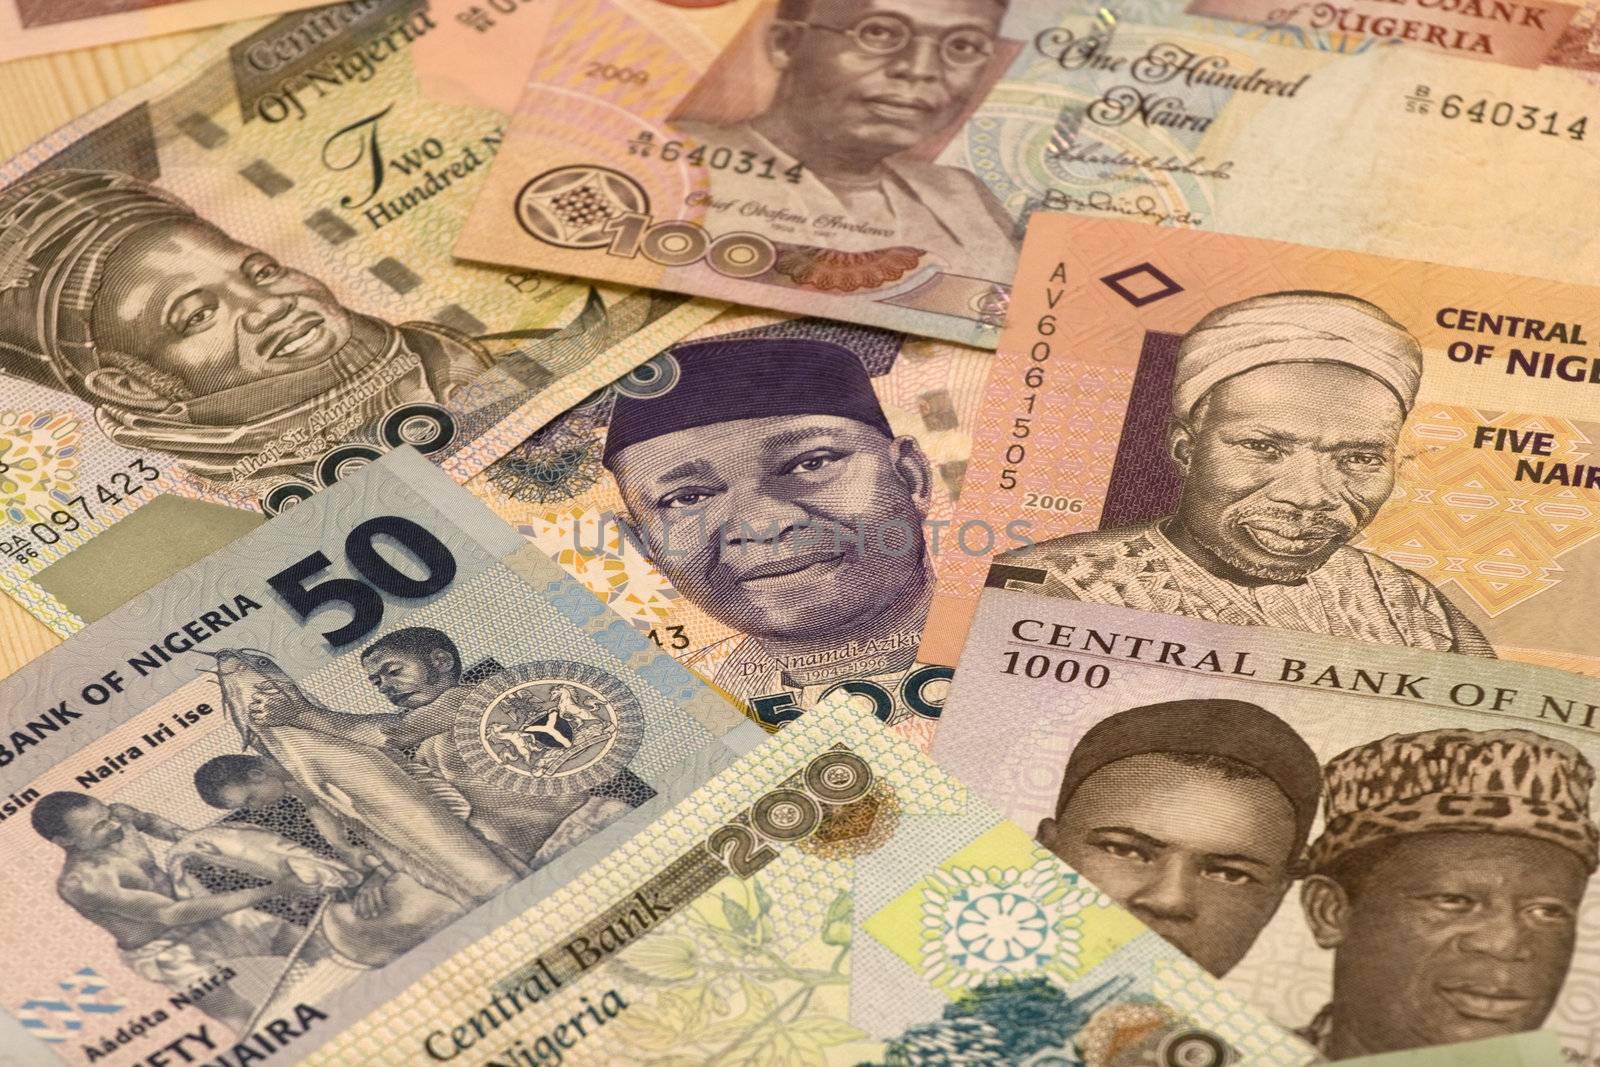 The naira is the currency of Nigeria. 